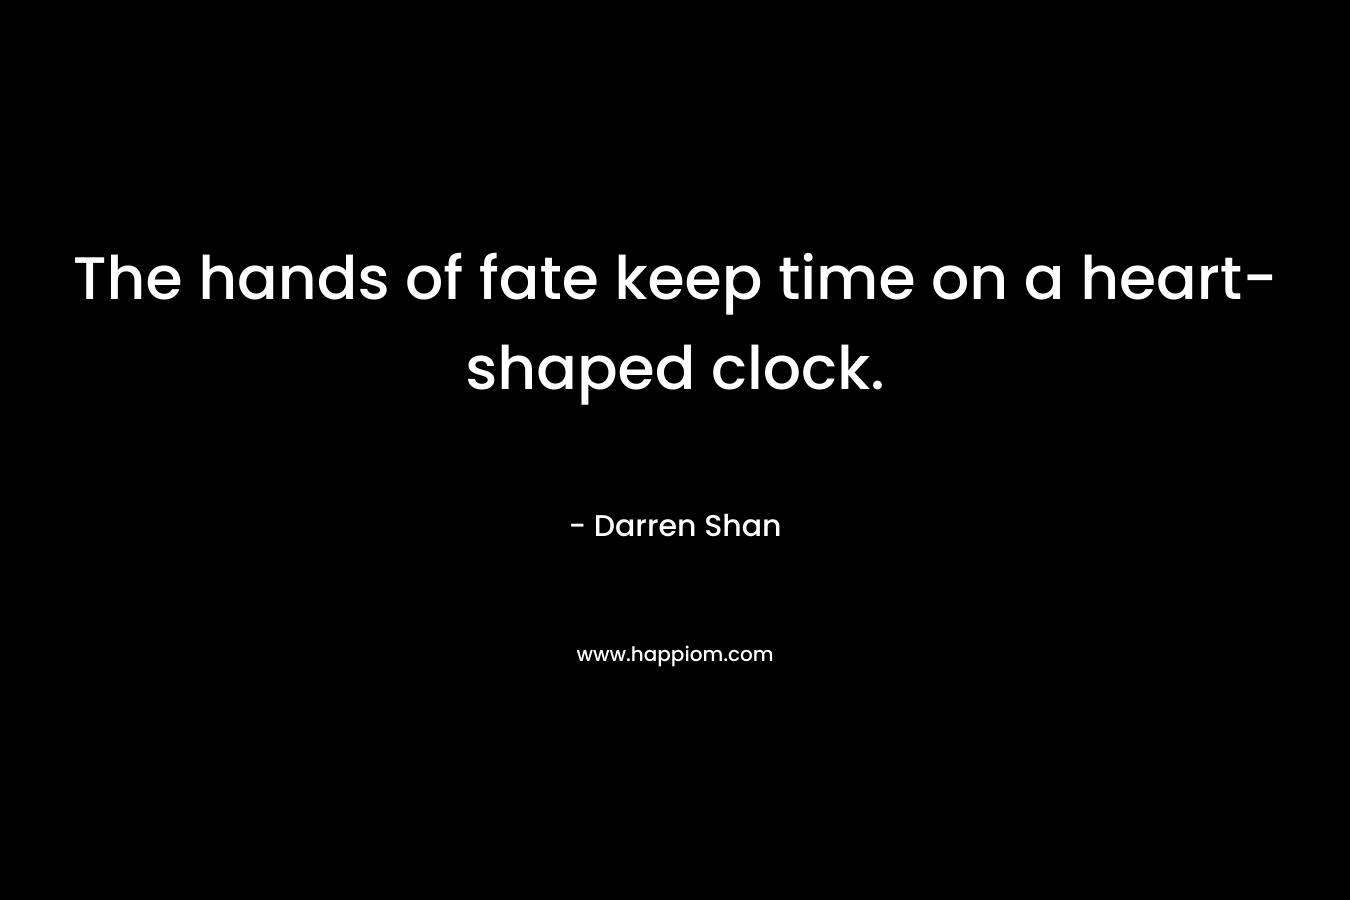 The hands of fate keep time on a heart-shaped clock. – Darren Shan